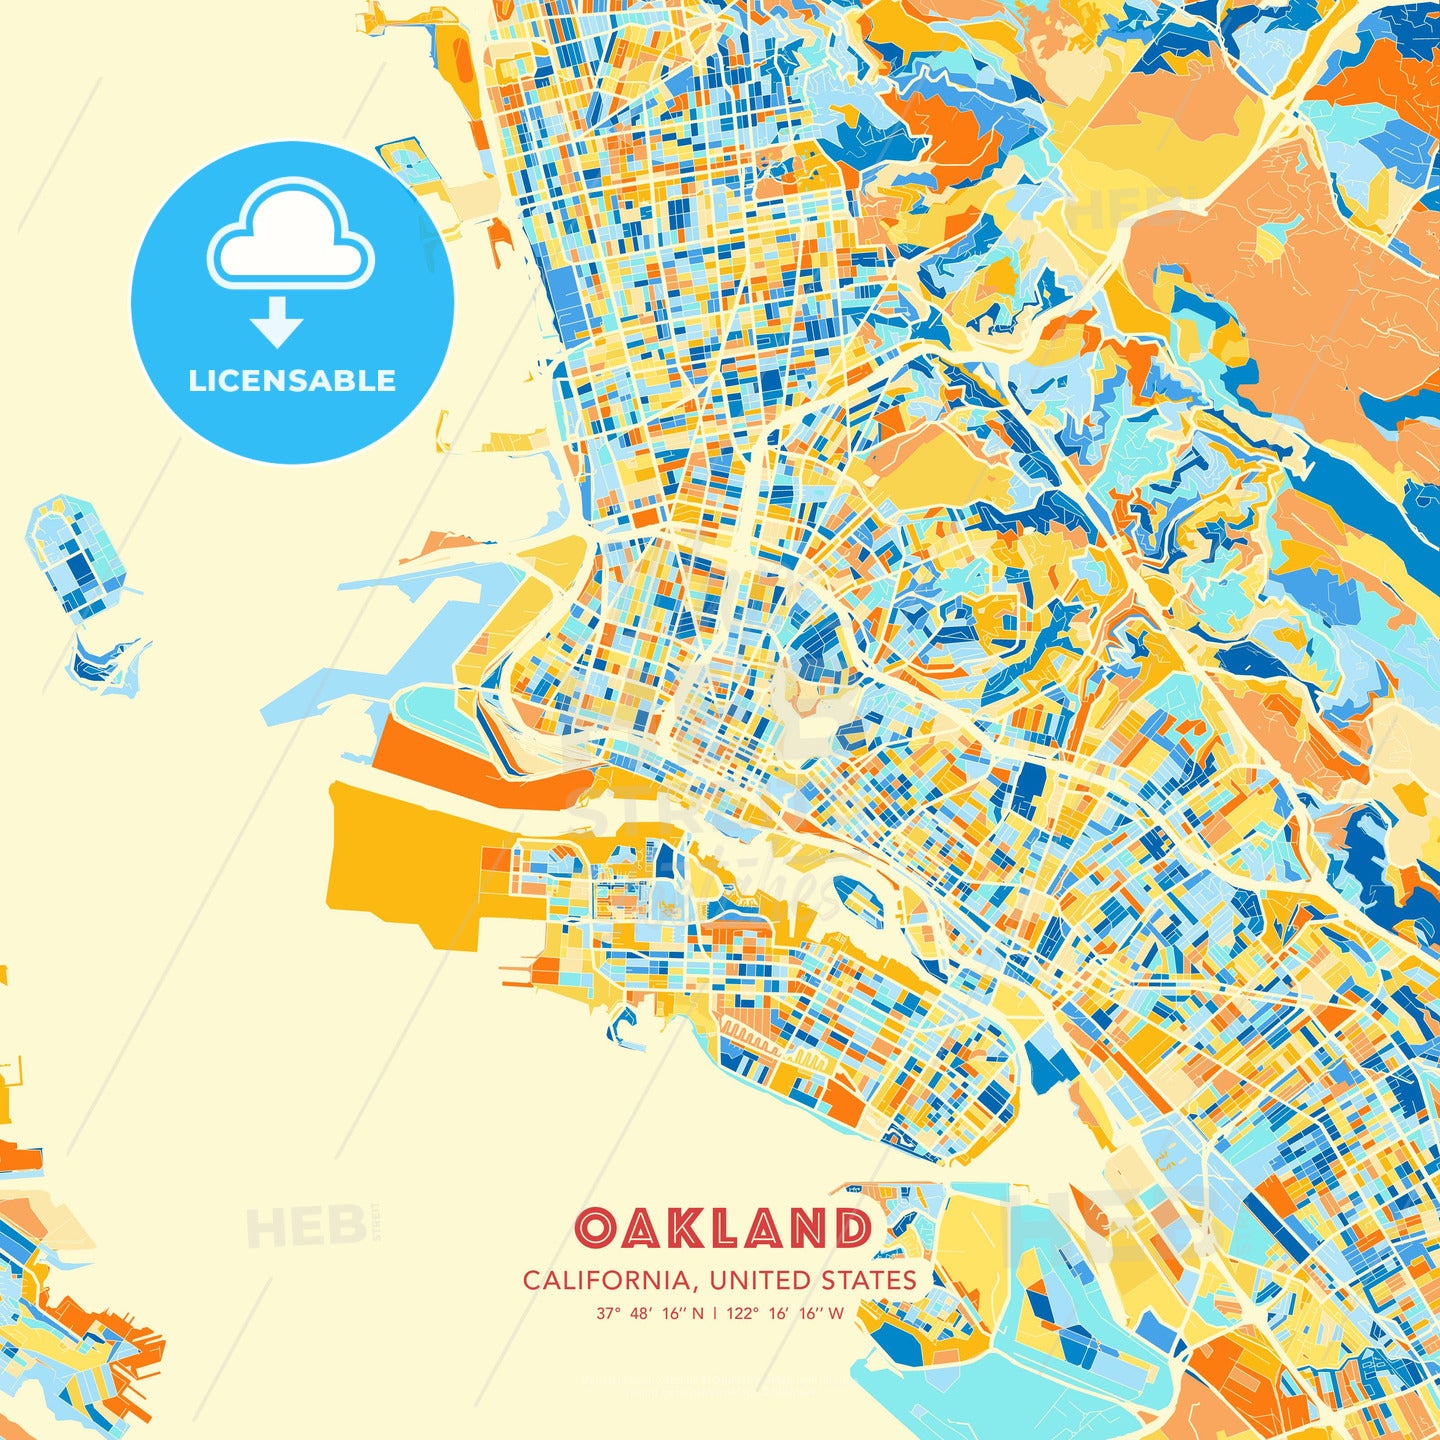 Oakland, California, United States, map - HEBSTREITS Sketches